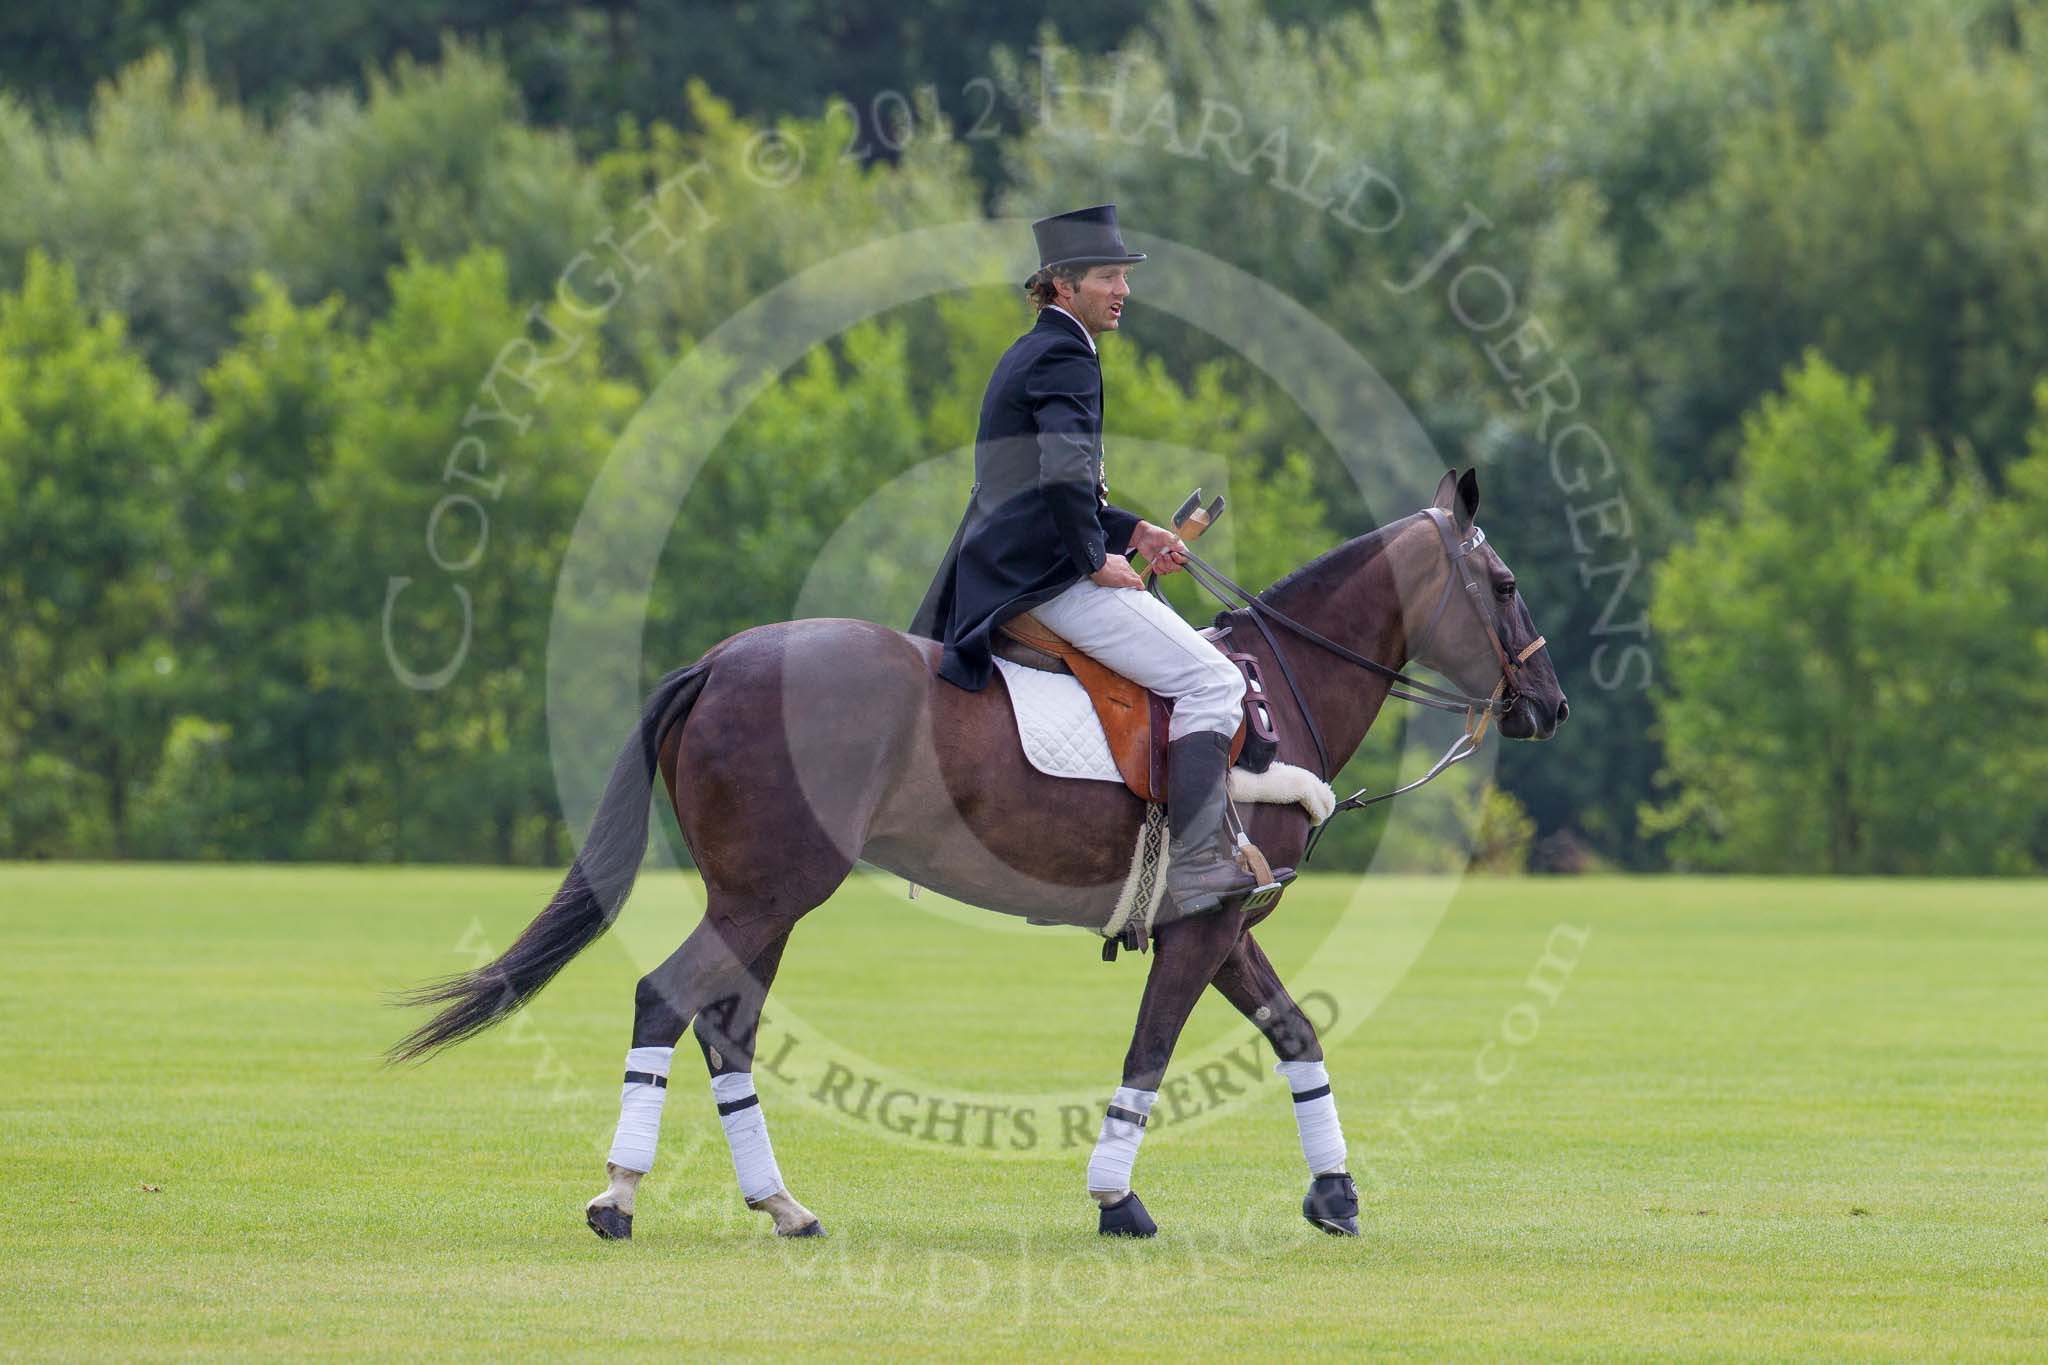 7th Heritage Polo Cup semi-finals: Umpire Guy Higginson..
Hurtwood Park Polo Club,
Ewhurst Green,
Surrey,
United Kingdom,
on 04 August 2012 at 10:59, image #1